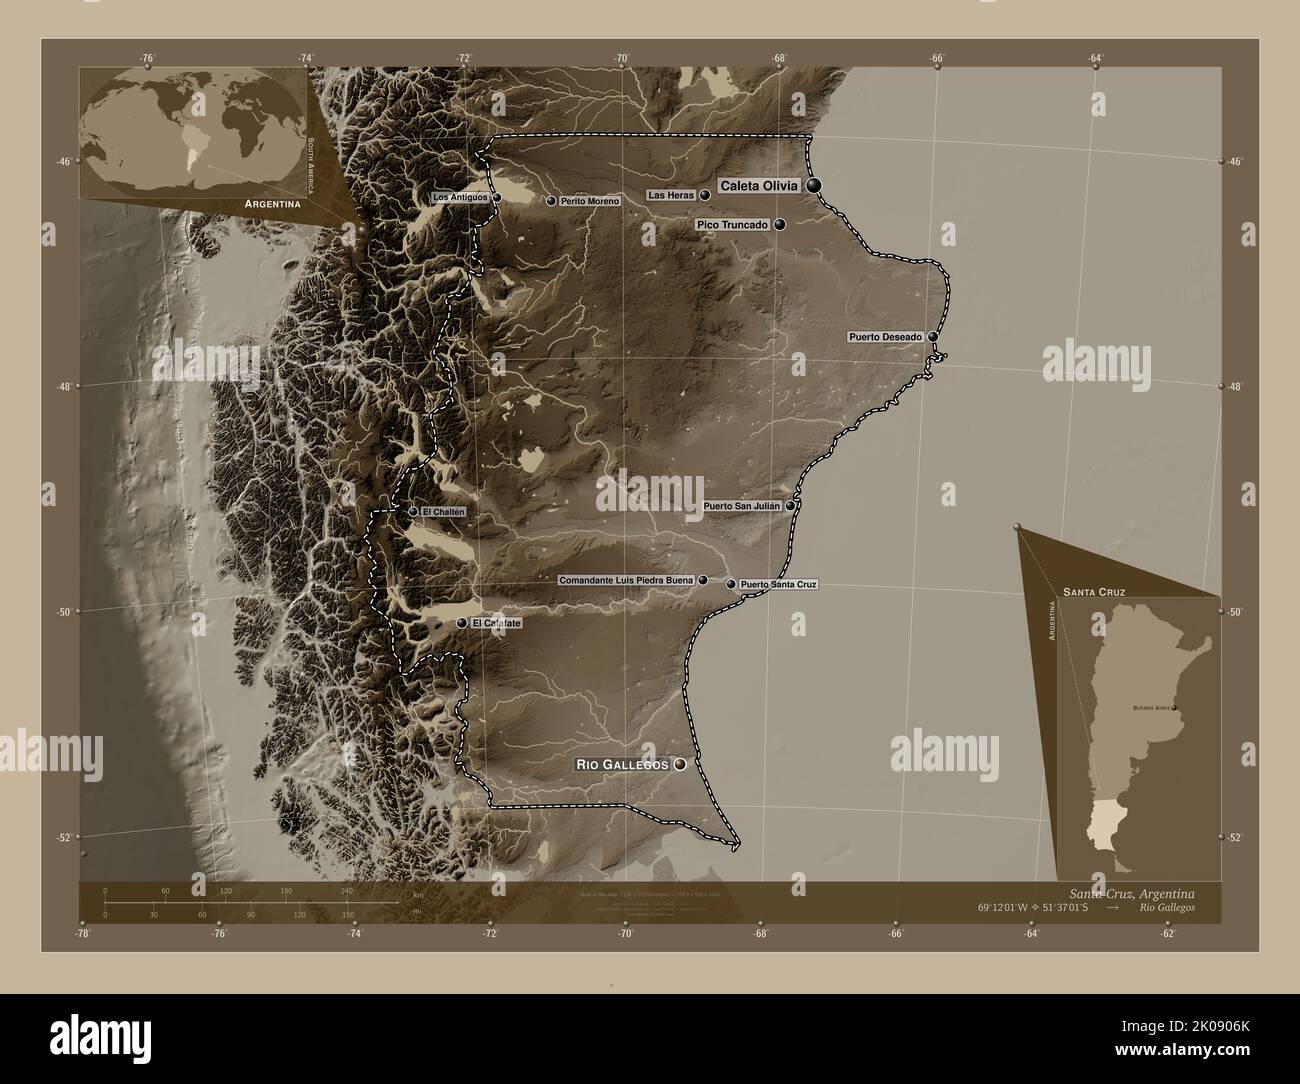 Santa Cruz, province of Argentina. Elevation map colored in sepia tones with lakes and rivers. Locations and names of major cities of the region. Corn Stock Photo